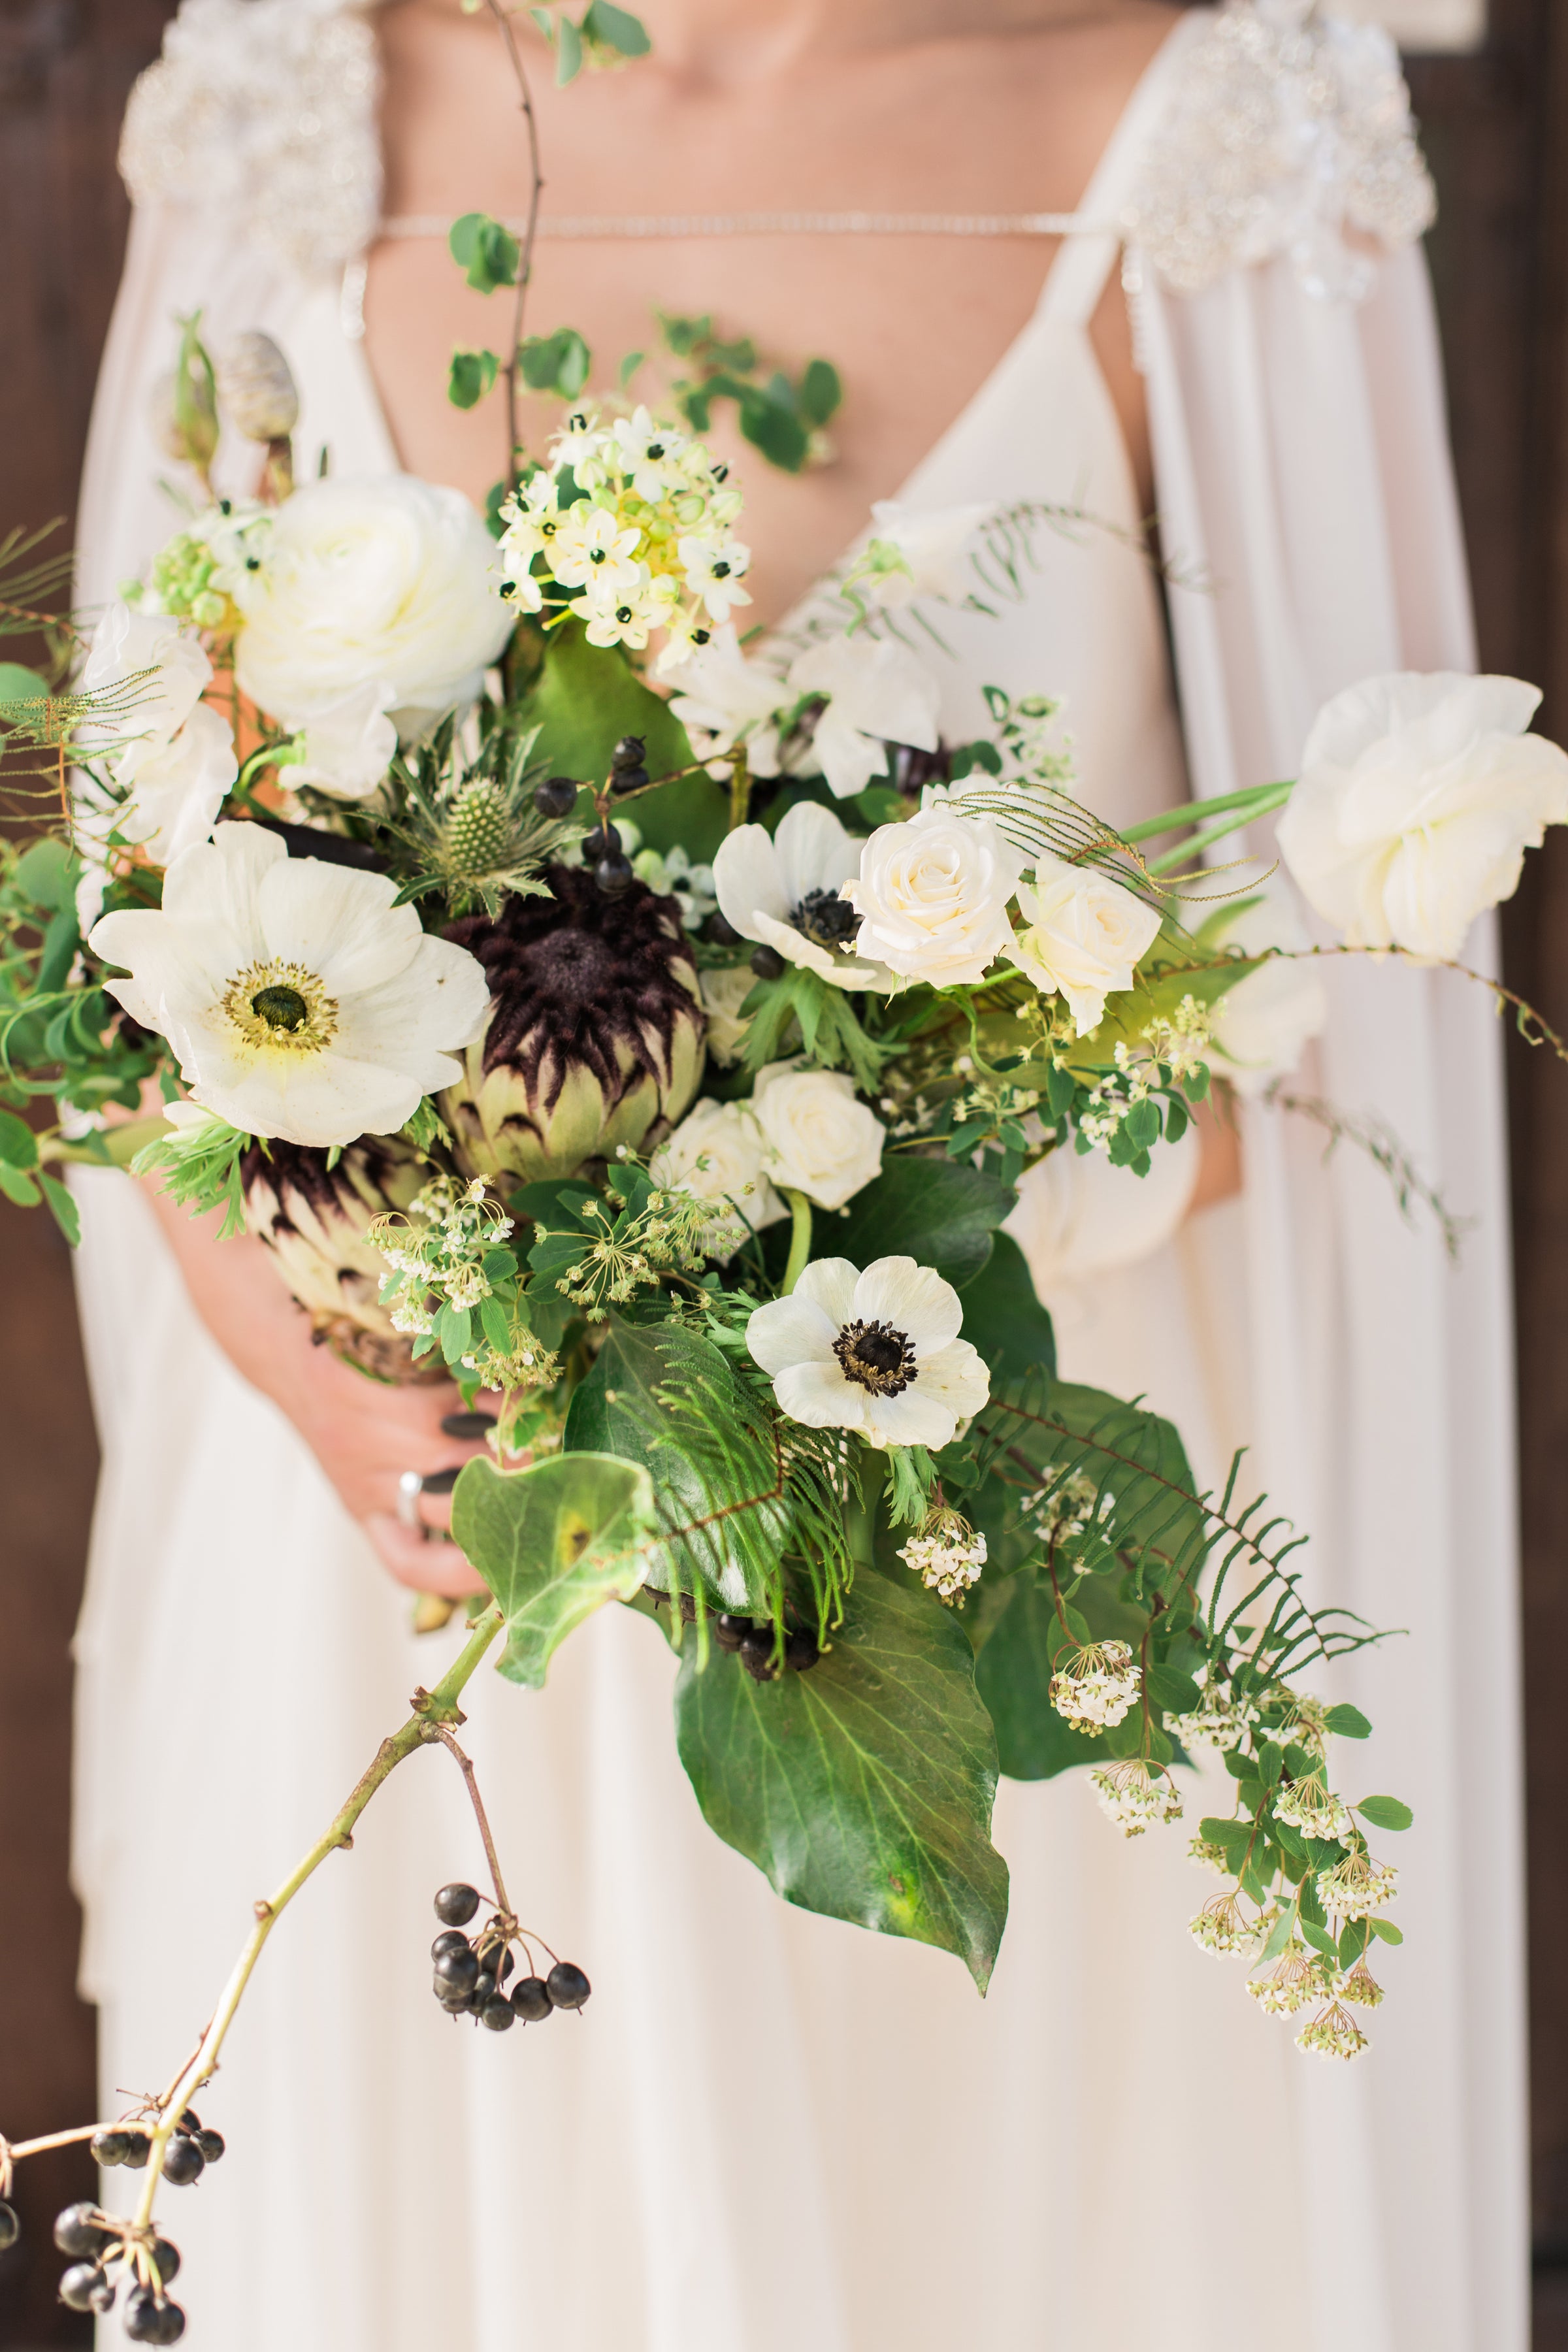 A garden style bridal bouquet. A variety of greenery, Flowers are white with dark centers. Focal flowers are white king protea and panda white anemones.